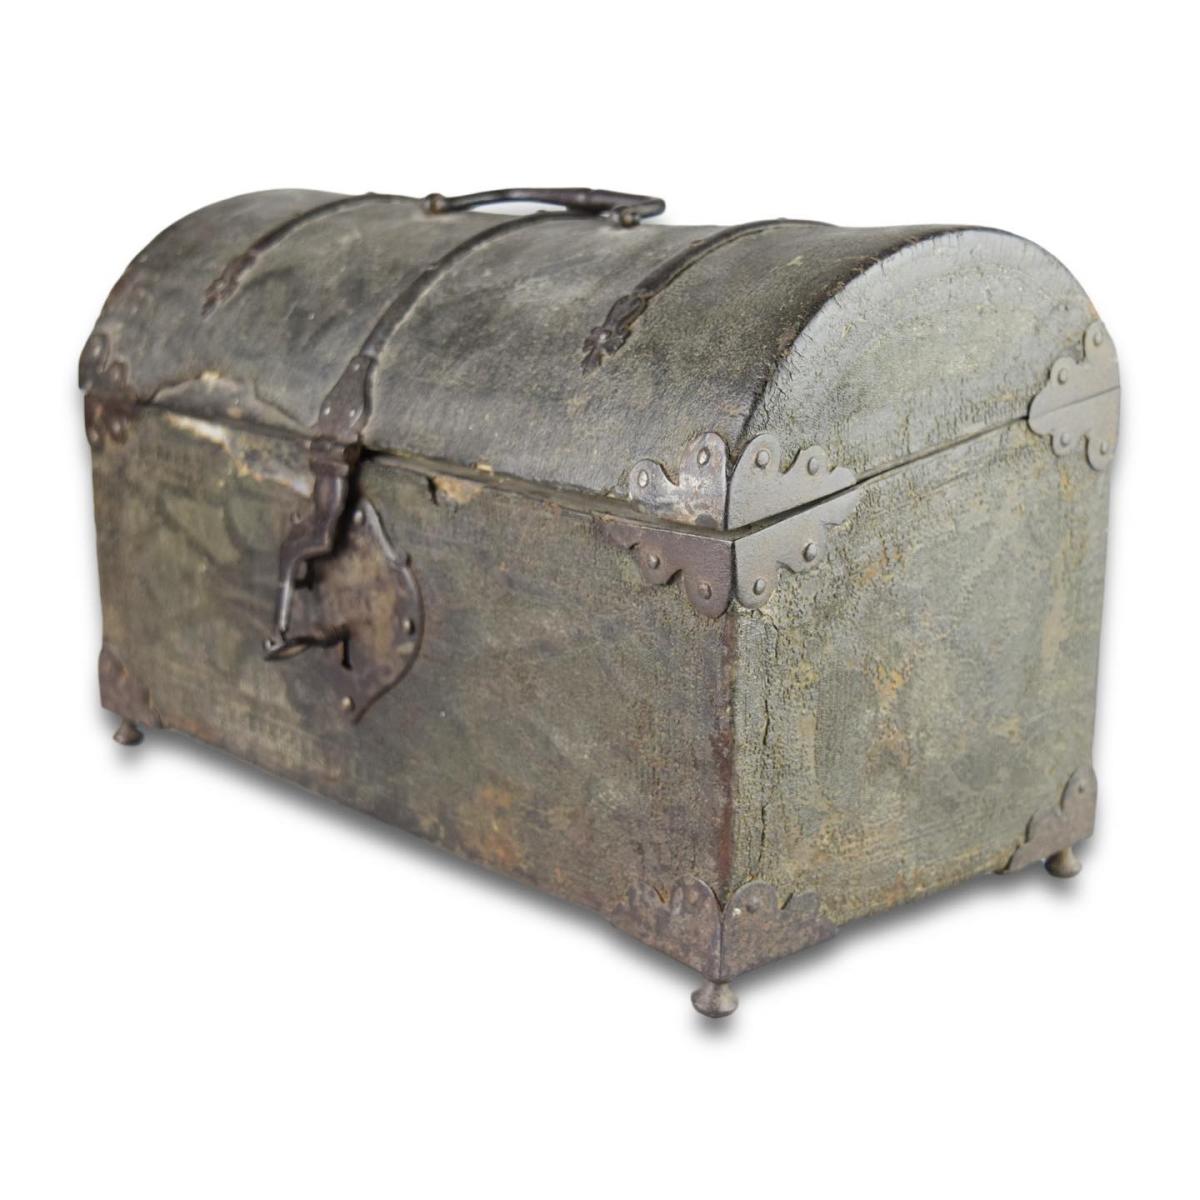 Iron mounted cuir bouilli casket. French, late 16th century